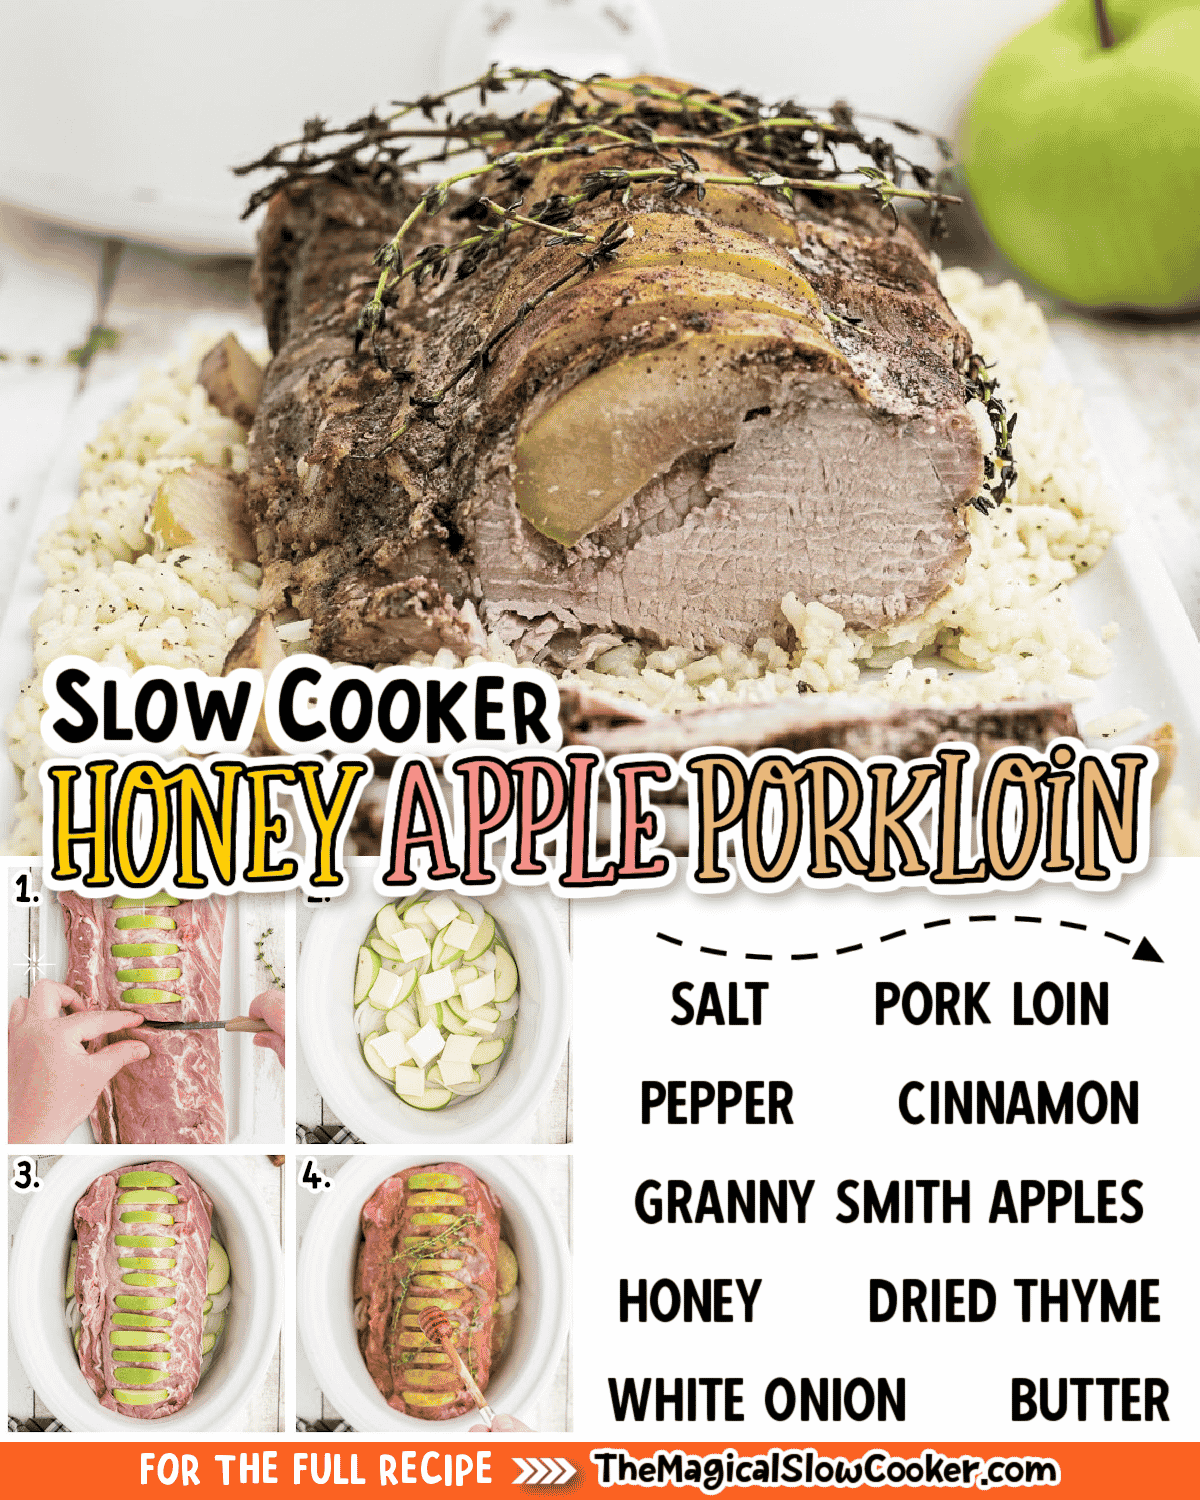 honey apple pork loin images with with text of ingredients.